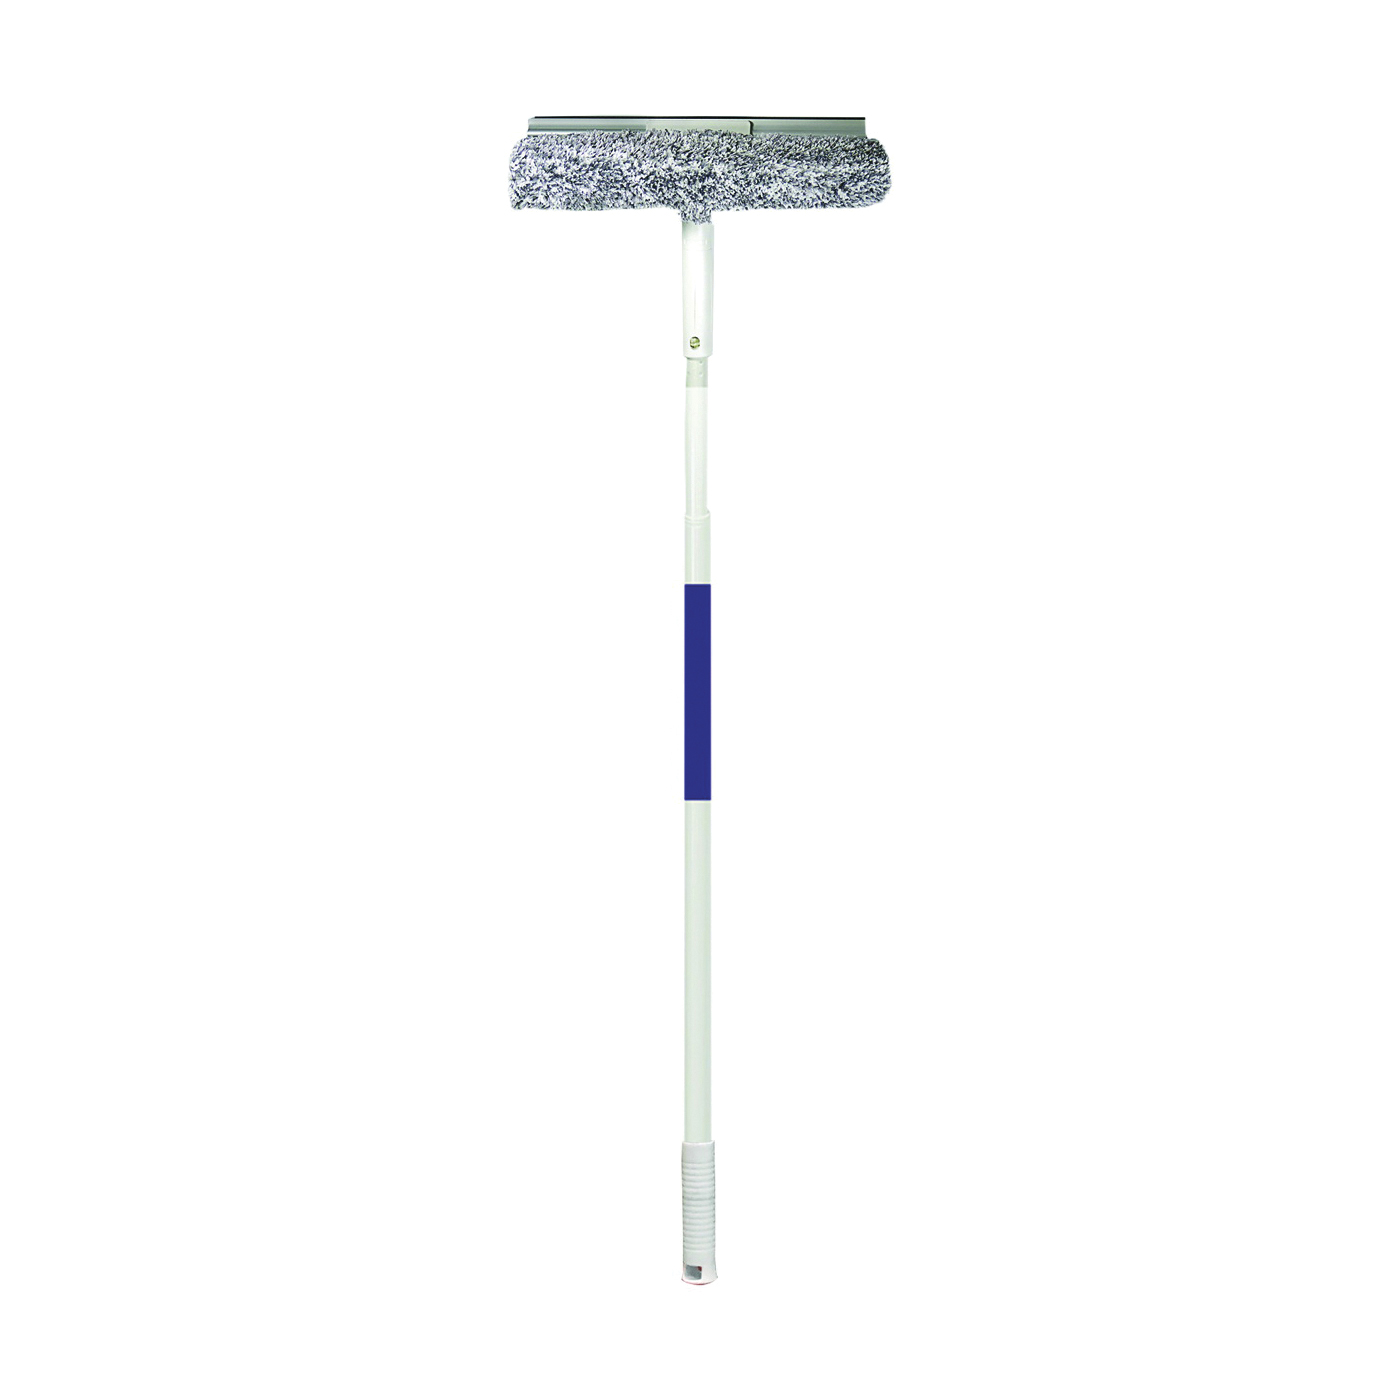 975620 Squeegee and Scrubber Kit, 39-3/4 in OAL, Gray/White